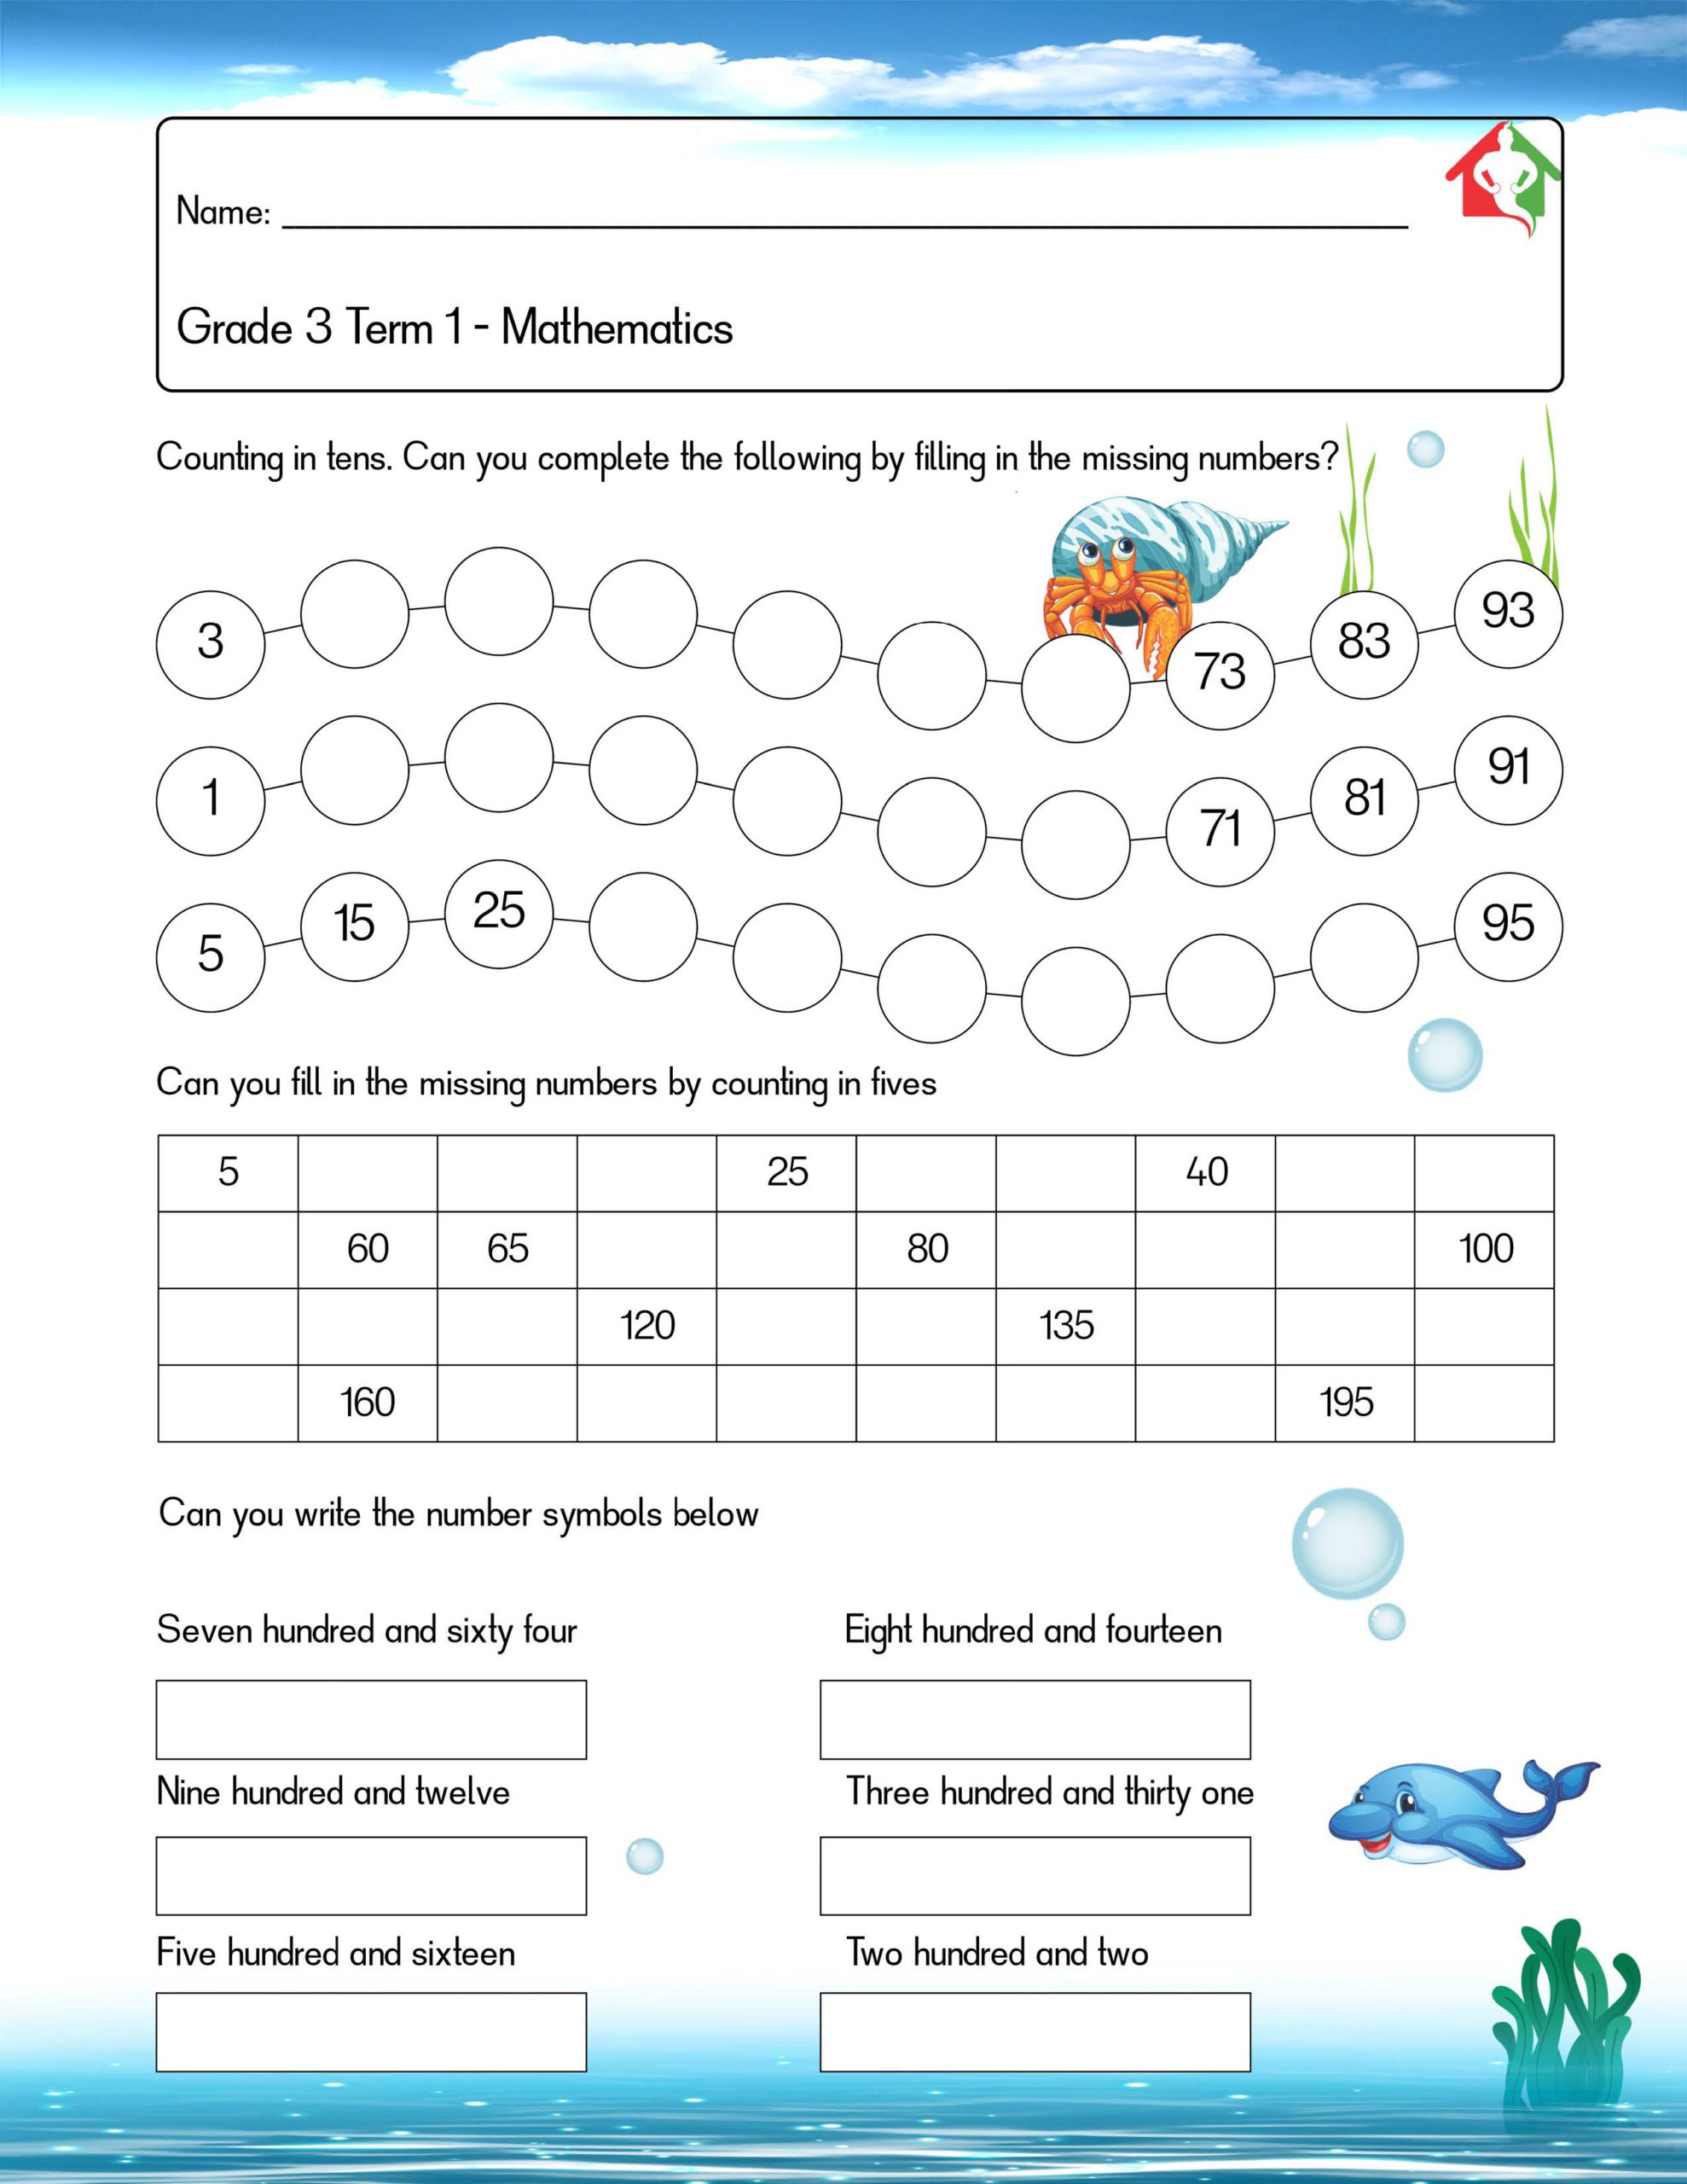 case study questions for grade 3 maths